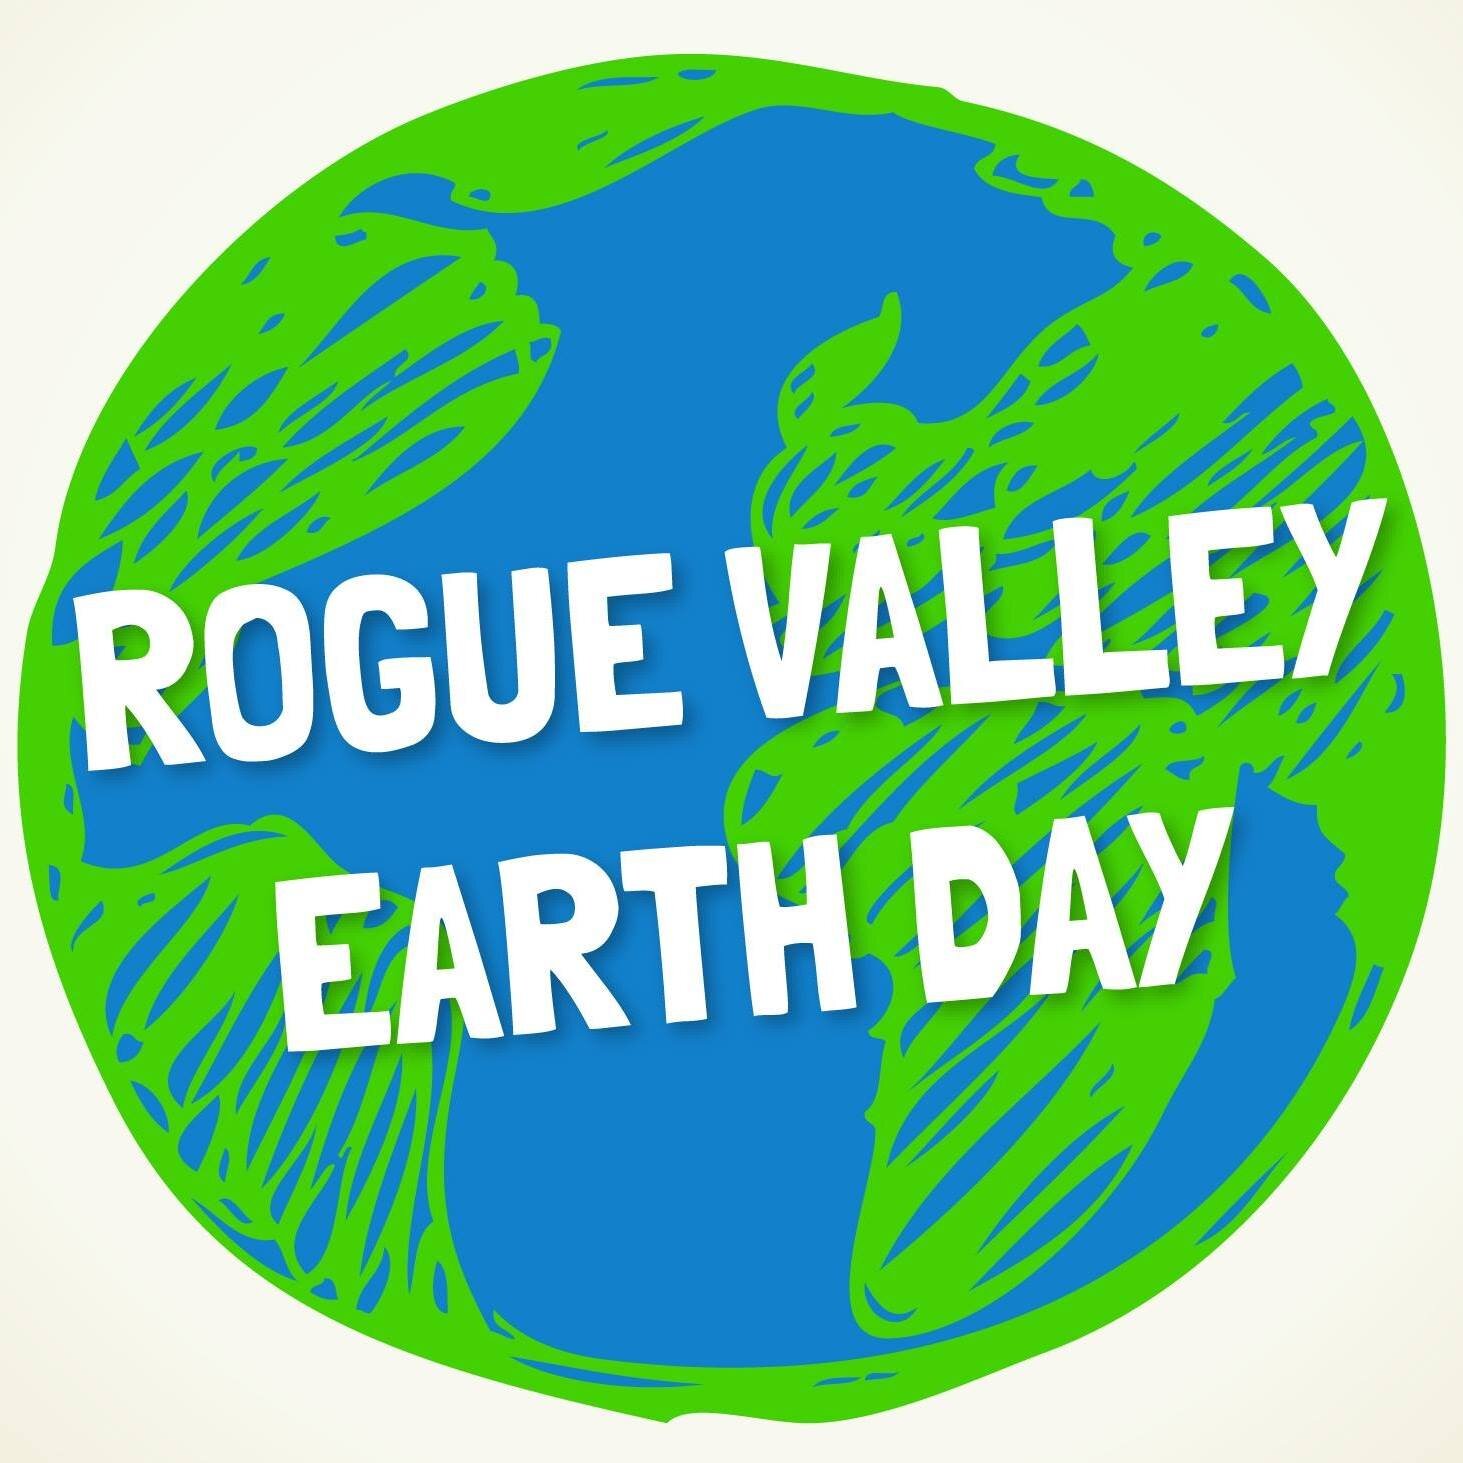 Rogue Valley Earth Day